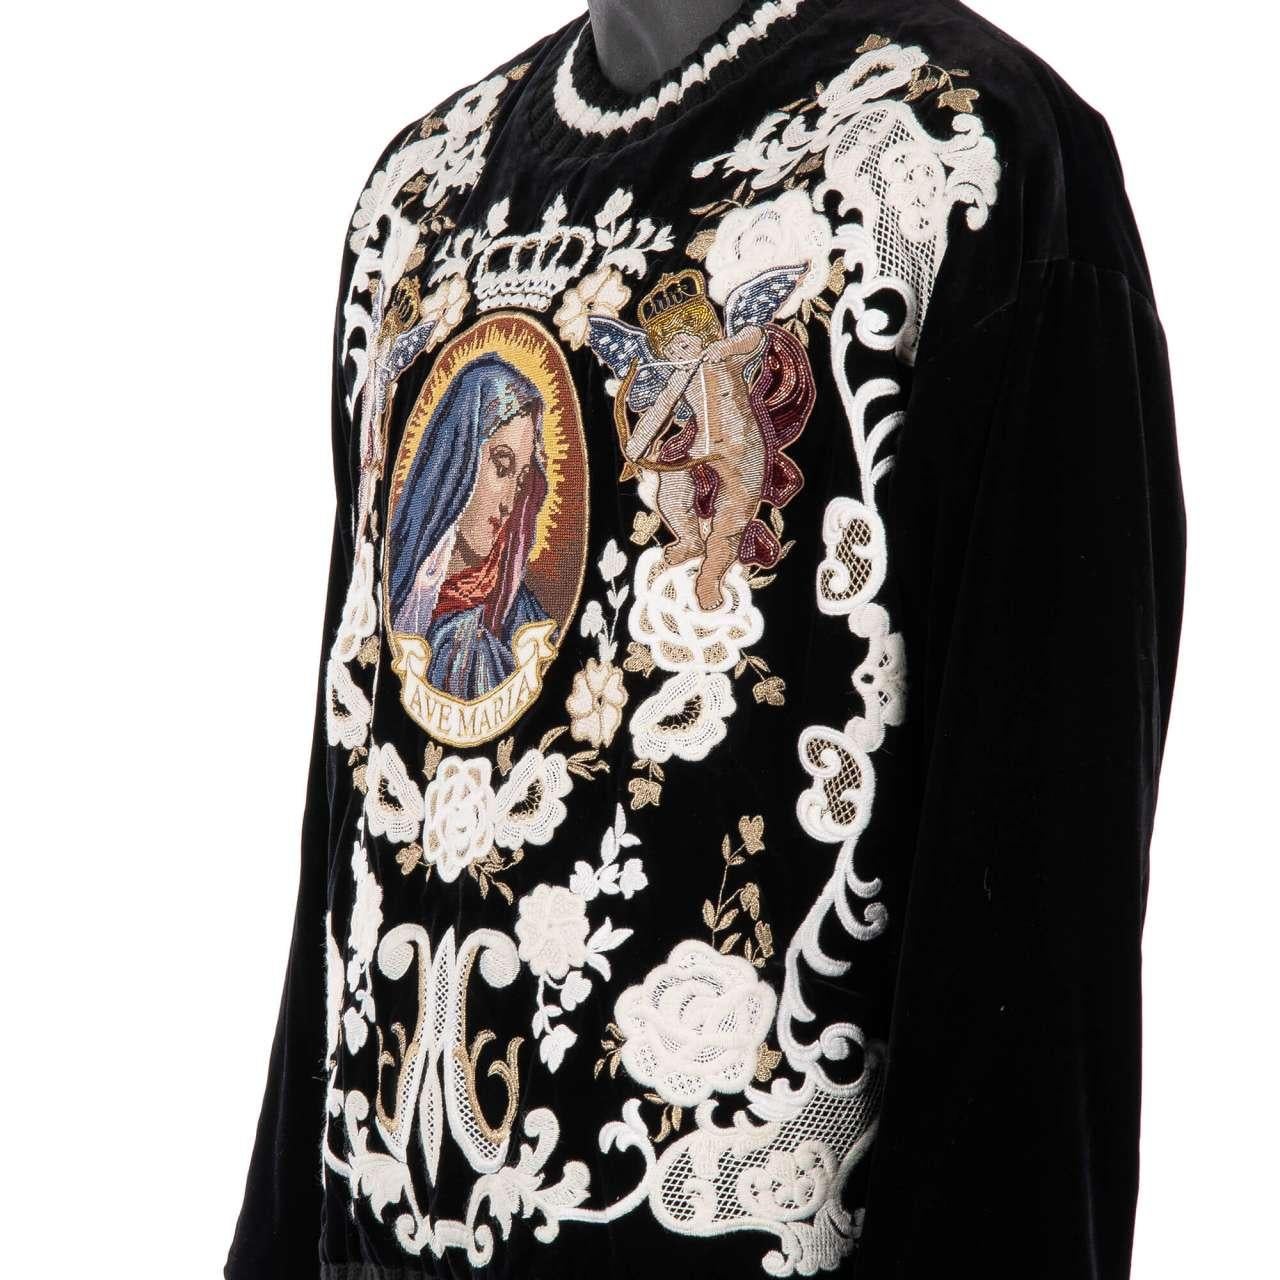 D&G Velvet Sweater with Angels and Santa Maria Embroidery Black White 54 In Excellent Condition For Sale In Erkrath, DE